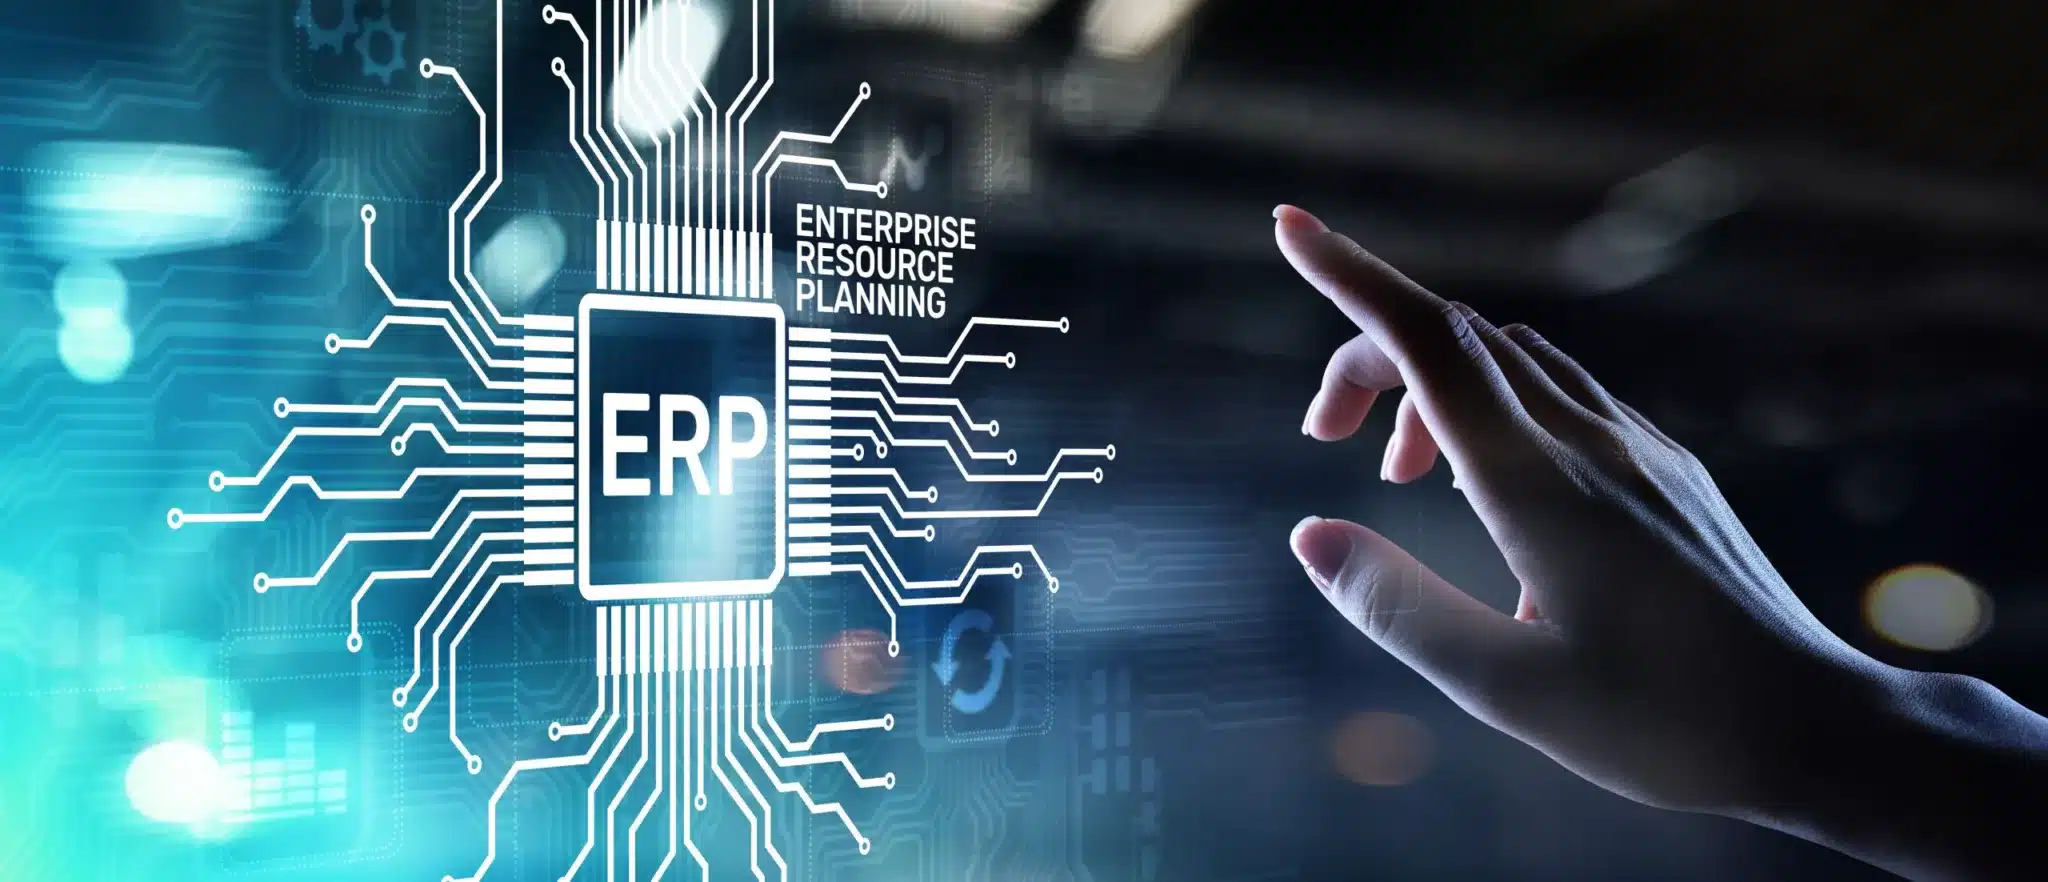 How ERP Works in an Organization: Benefits and Considerations